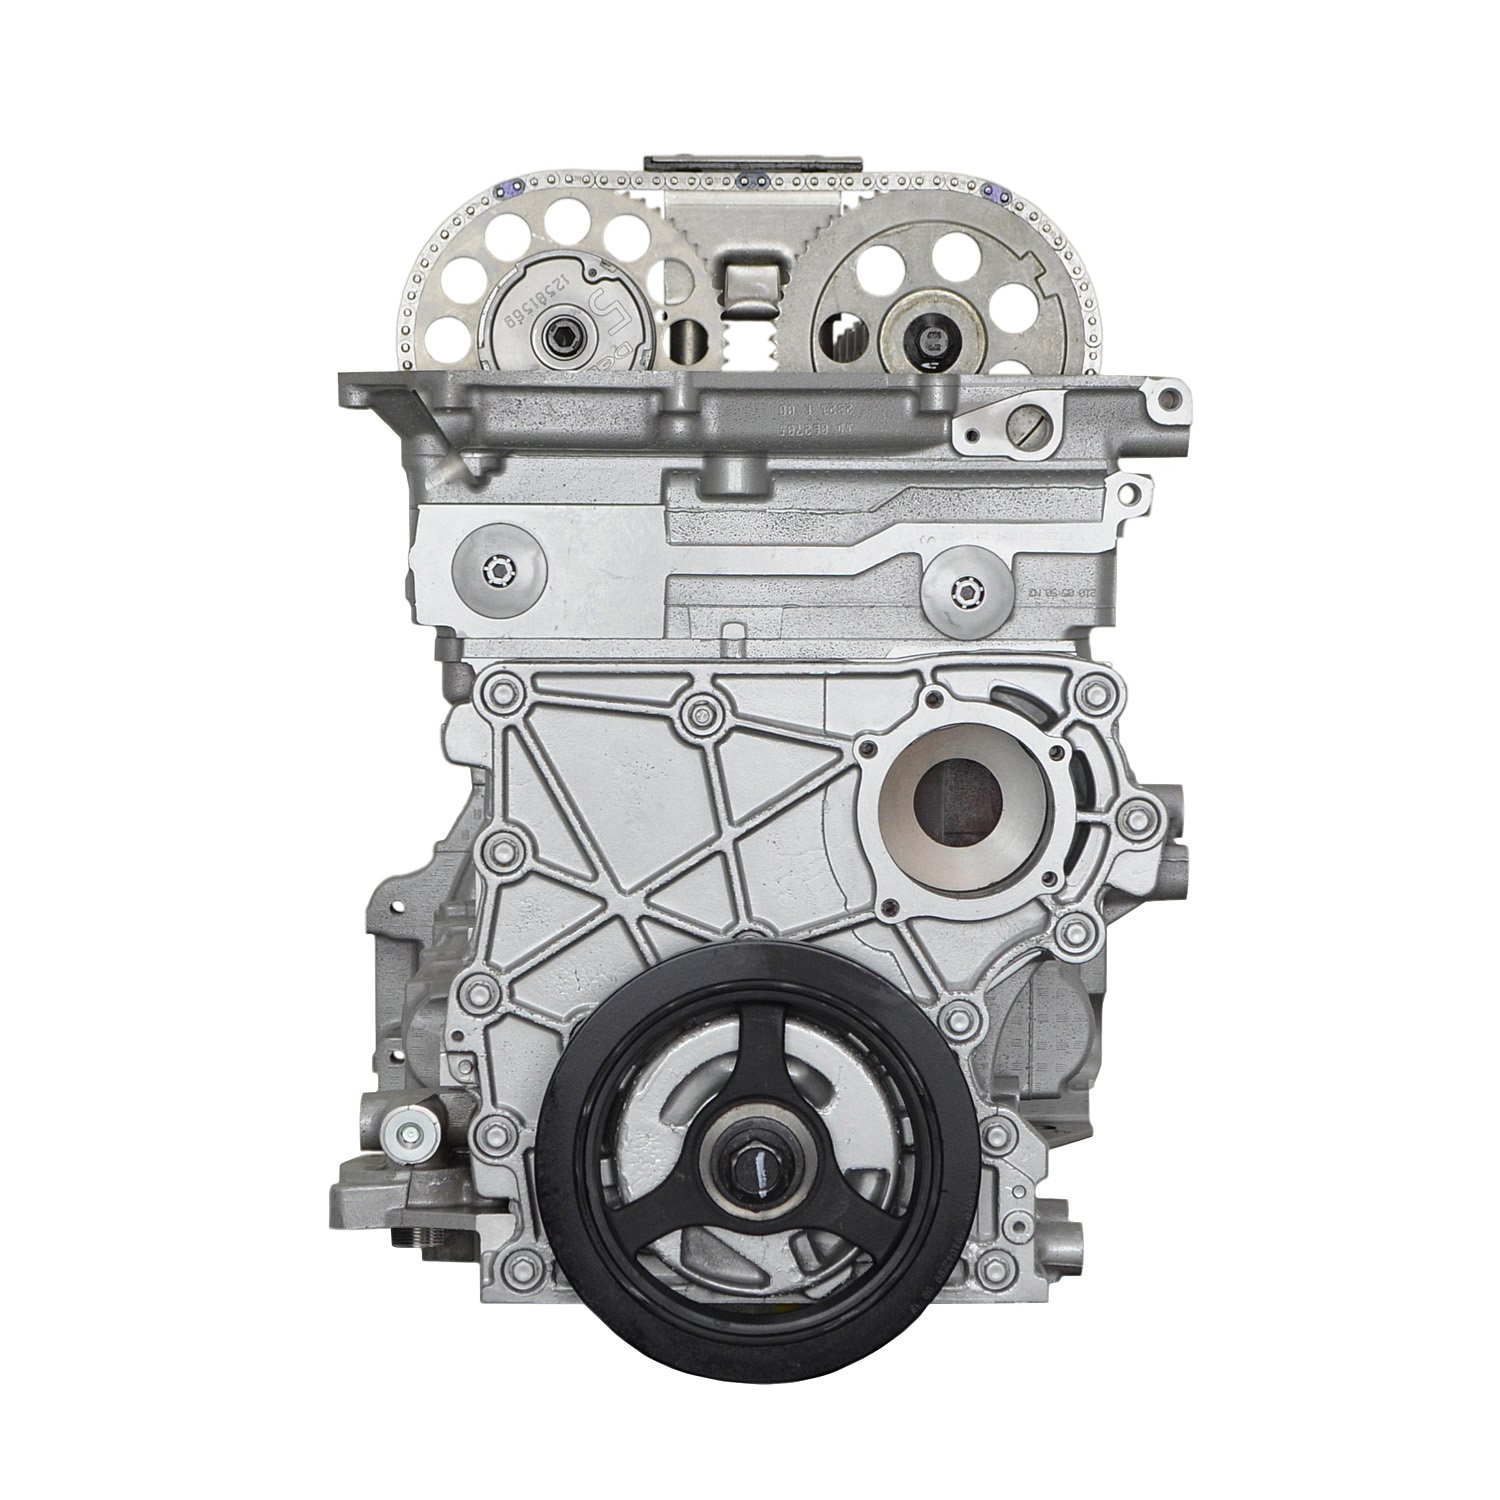 DCTZ Remanufactured Crate Engine for 2006 Chevy Colorado, GMC Canyon, & Hummer H3 with 3.5L L5